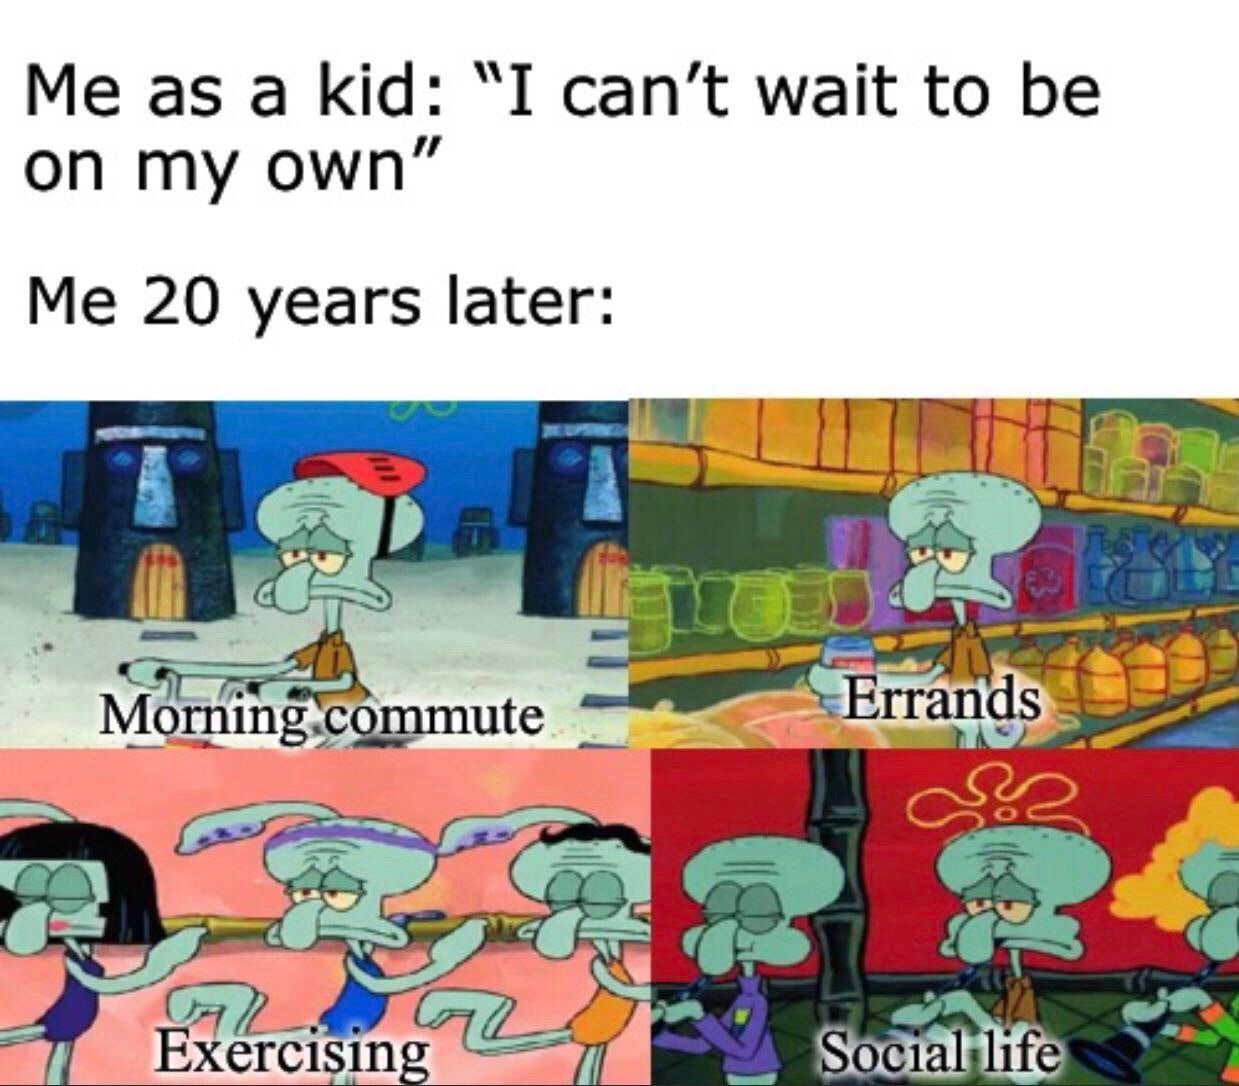 squidward tentacles - Me as a kid "I can't wait to be on my own" Me 20 years later Morning commute Errands Exercising Social life